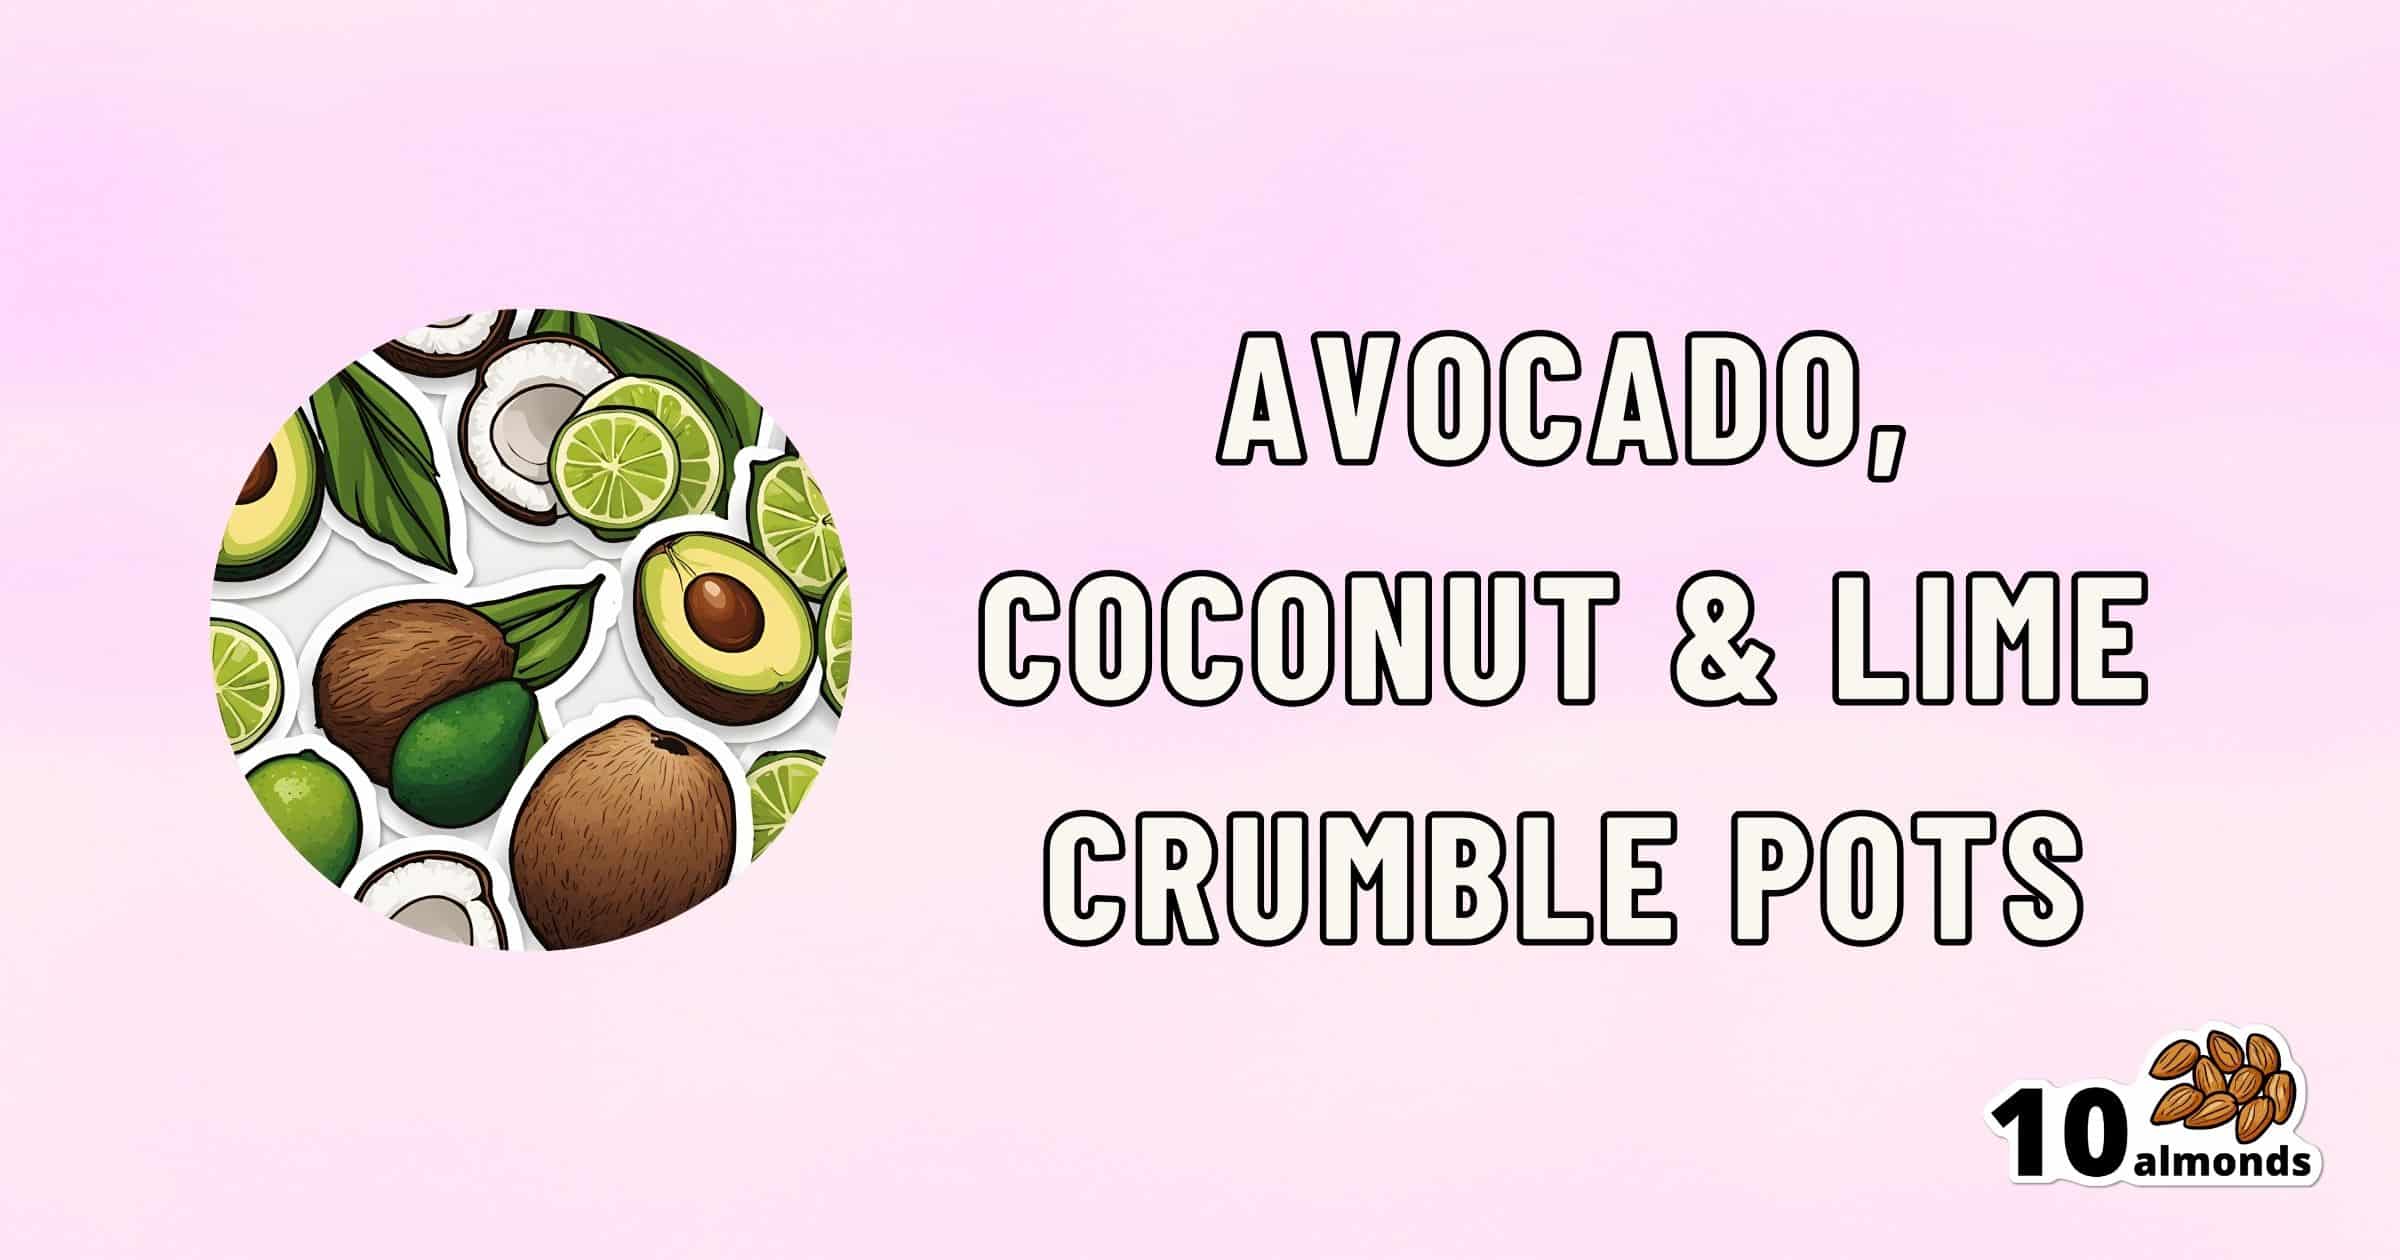 An image with a light pink background featuring illustrations of avocados, limes, and coconuts on the left side. The text on the right reads, "Avocado, Coconut & Lime Crumble Pots." In the bottom right corner, there is a graphic of 10 almonds.